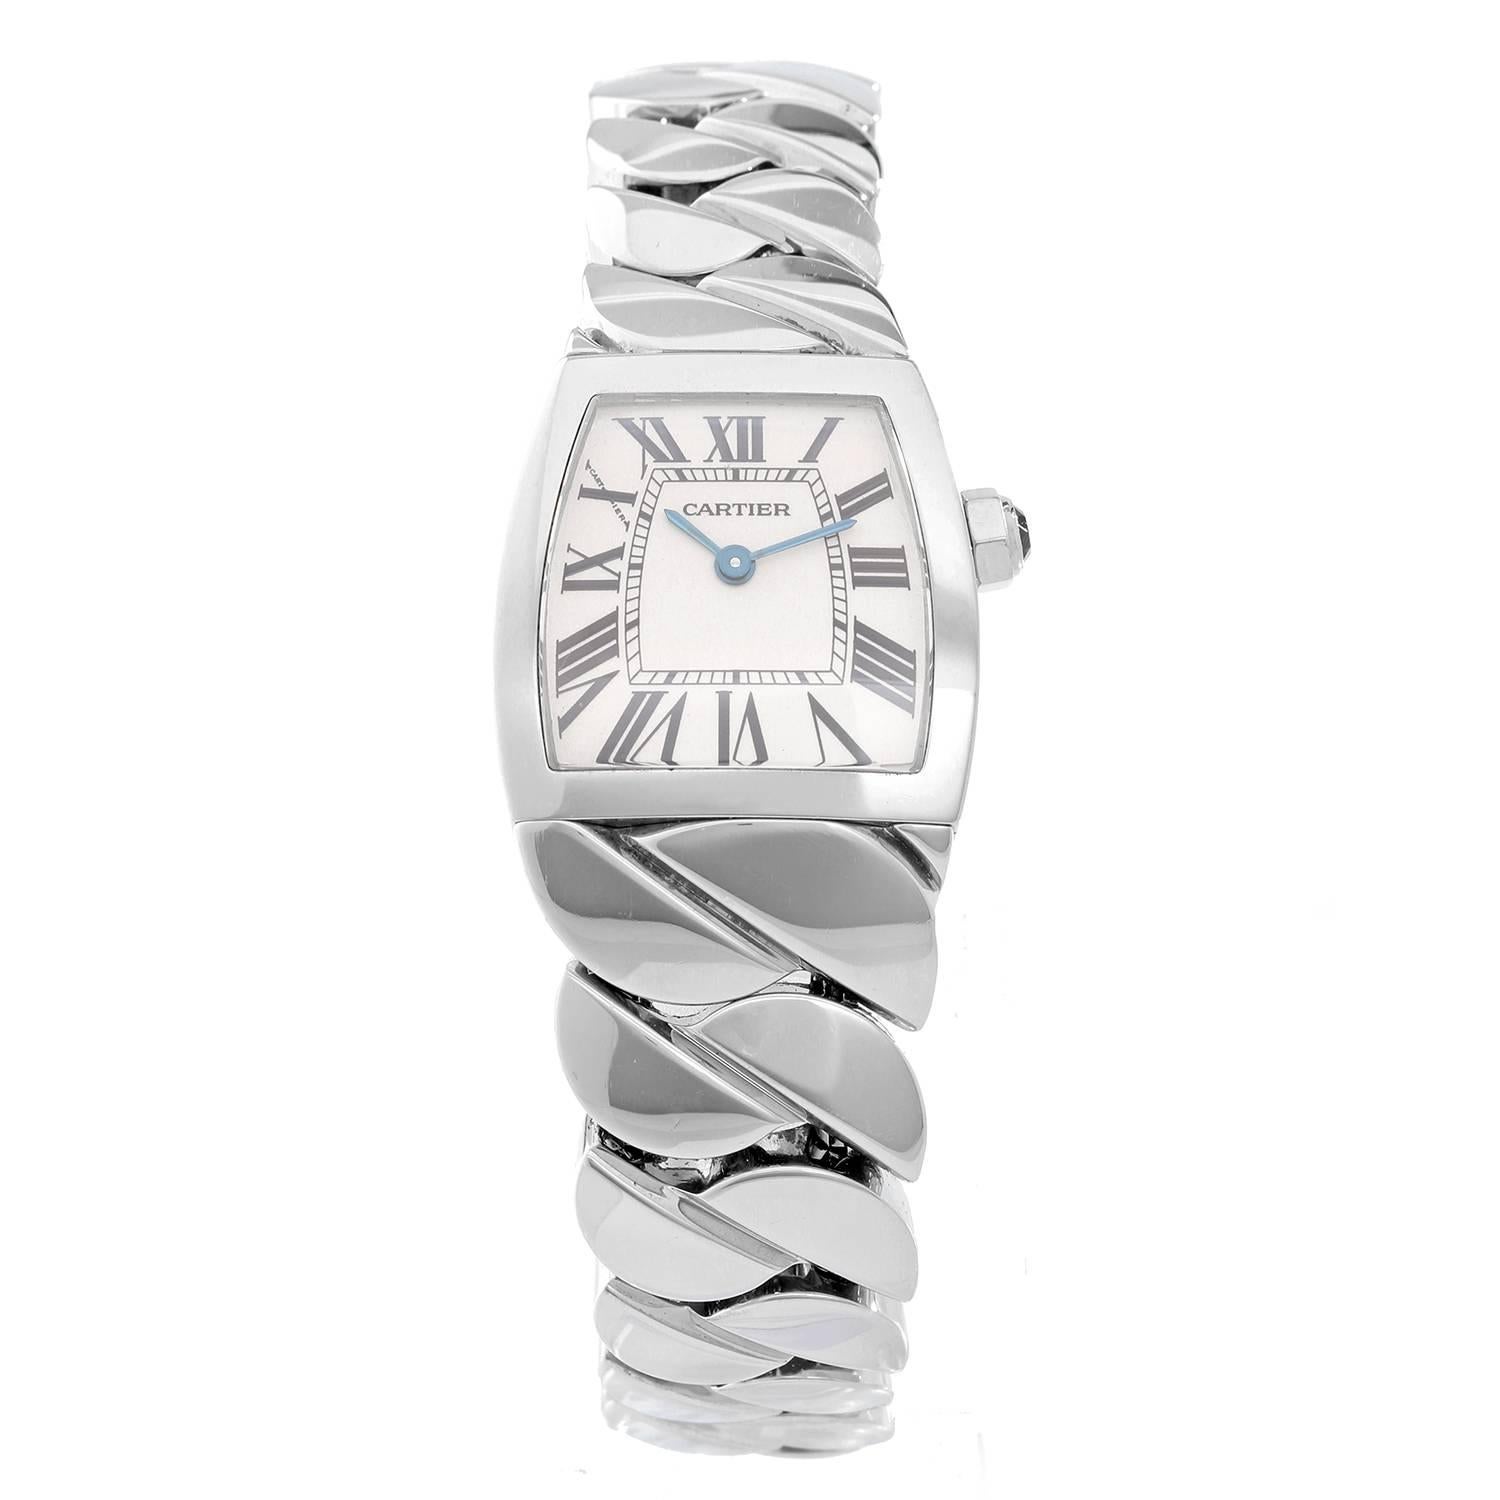 Cartier La Dona Ladies Stainless Steel Watch Ref 2902 -  Quartz. Stainless Steel (22 mm). White dial with Roman numerals. Stainless steel with double deployant buckle. Pre-owned with custom box.